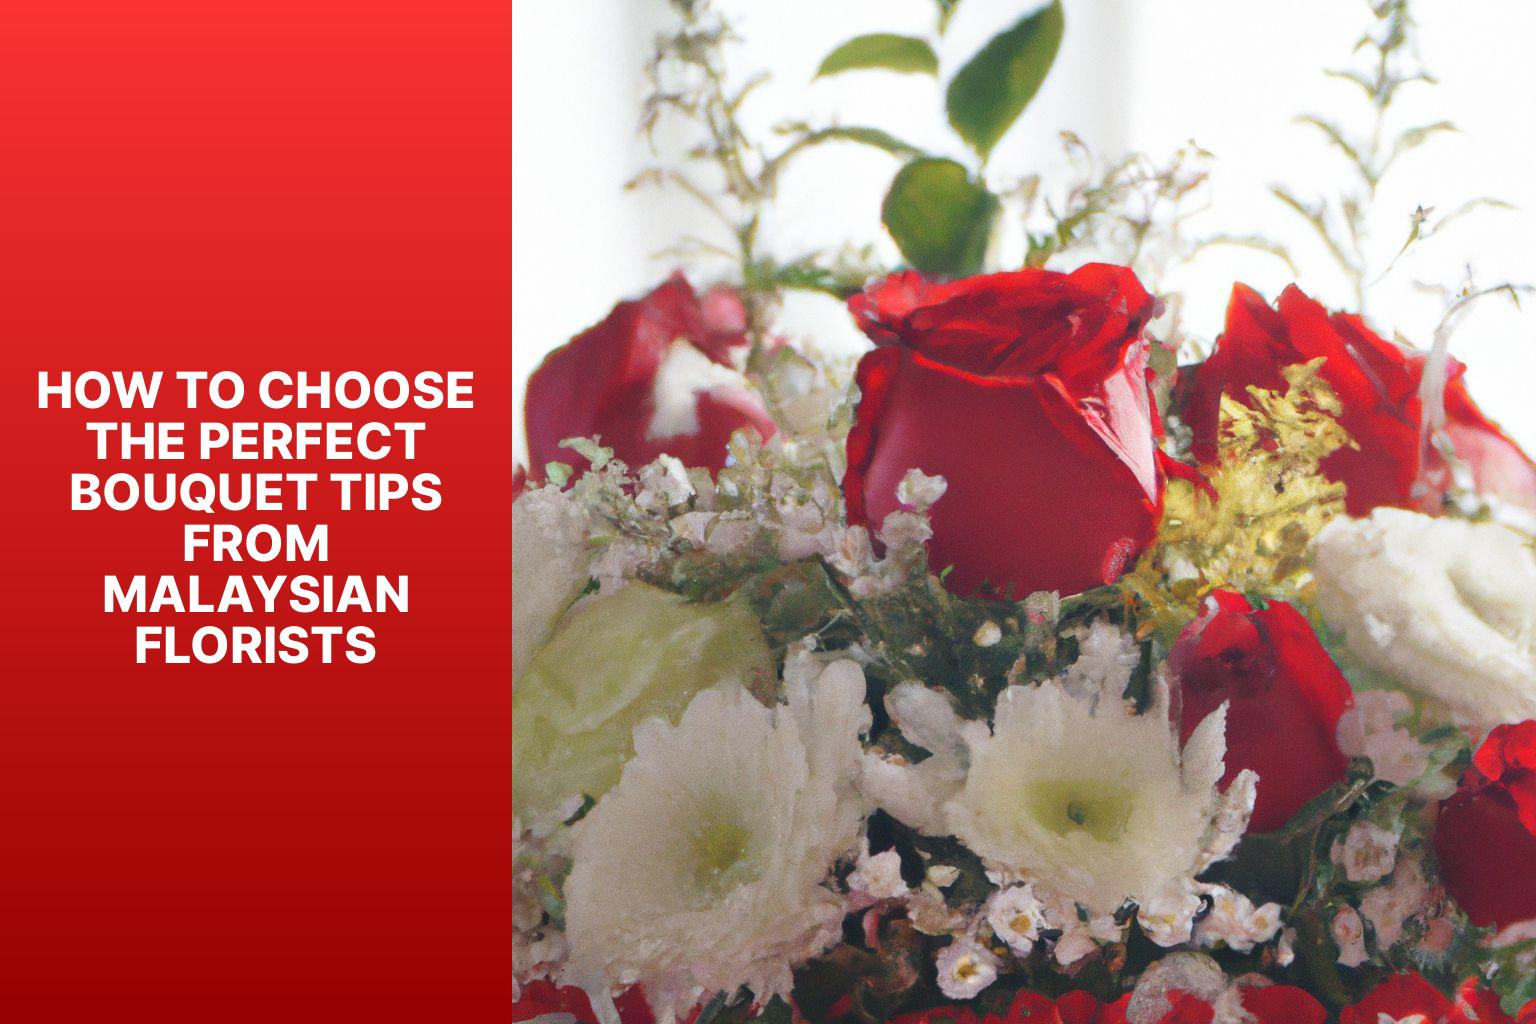 How to Choose the Perfect Bouquet Tips from Malaysian Florists